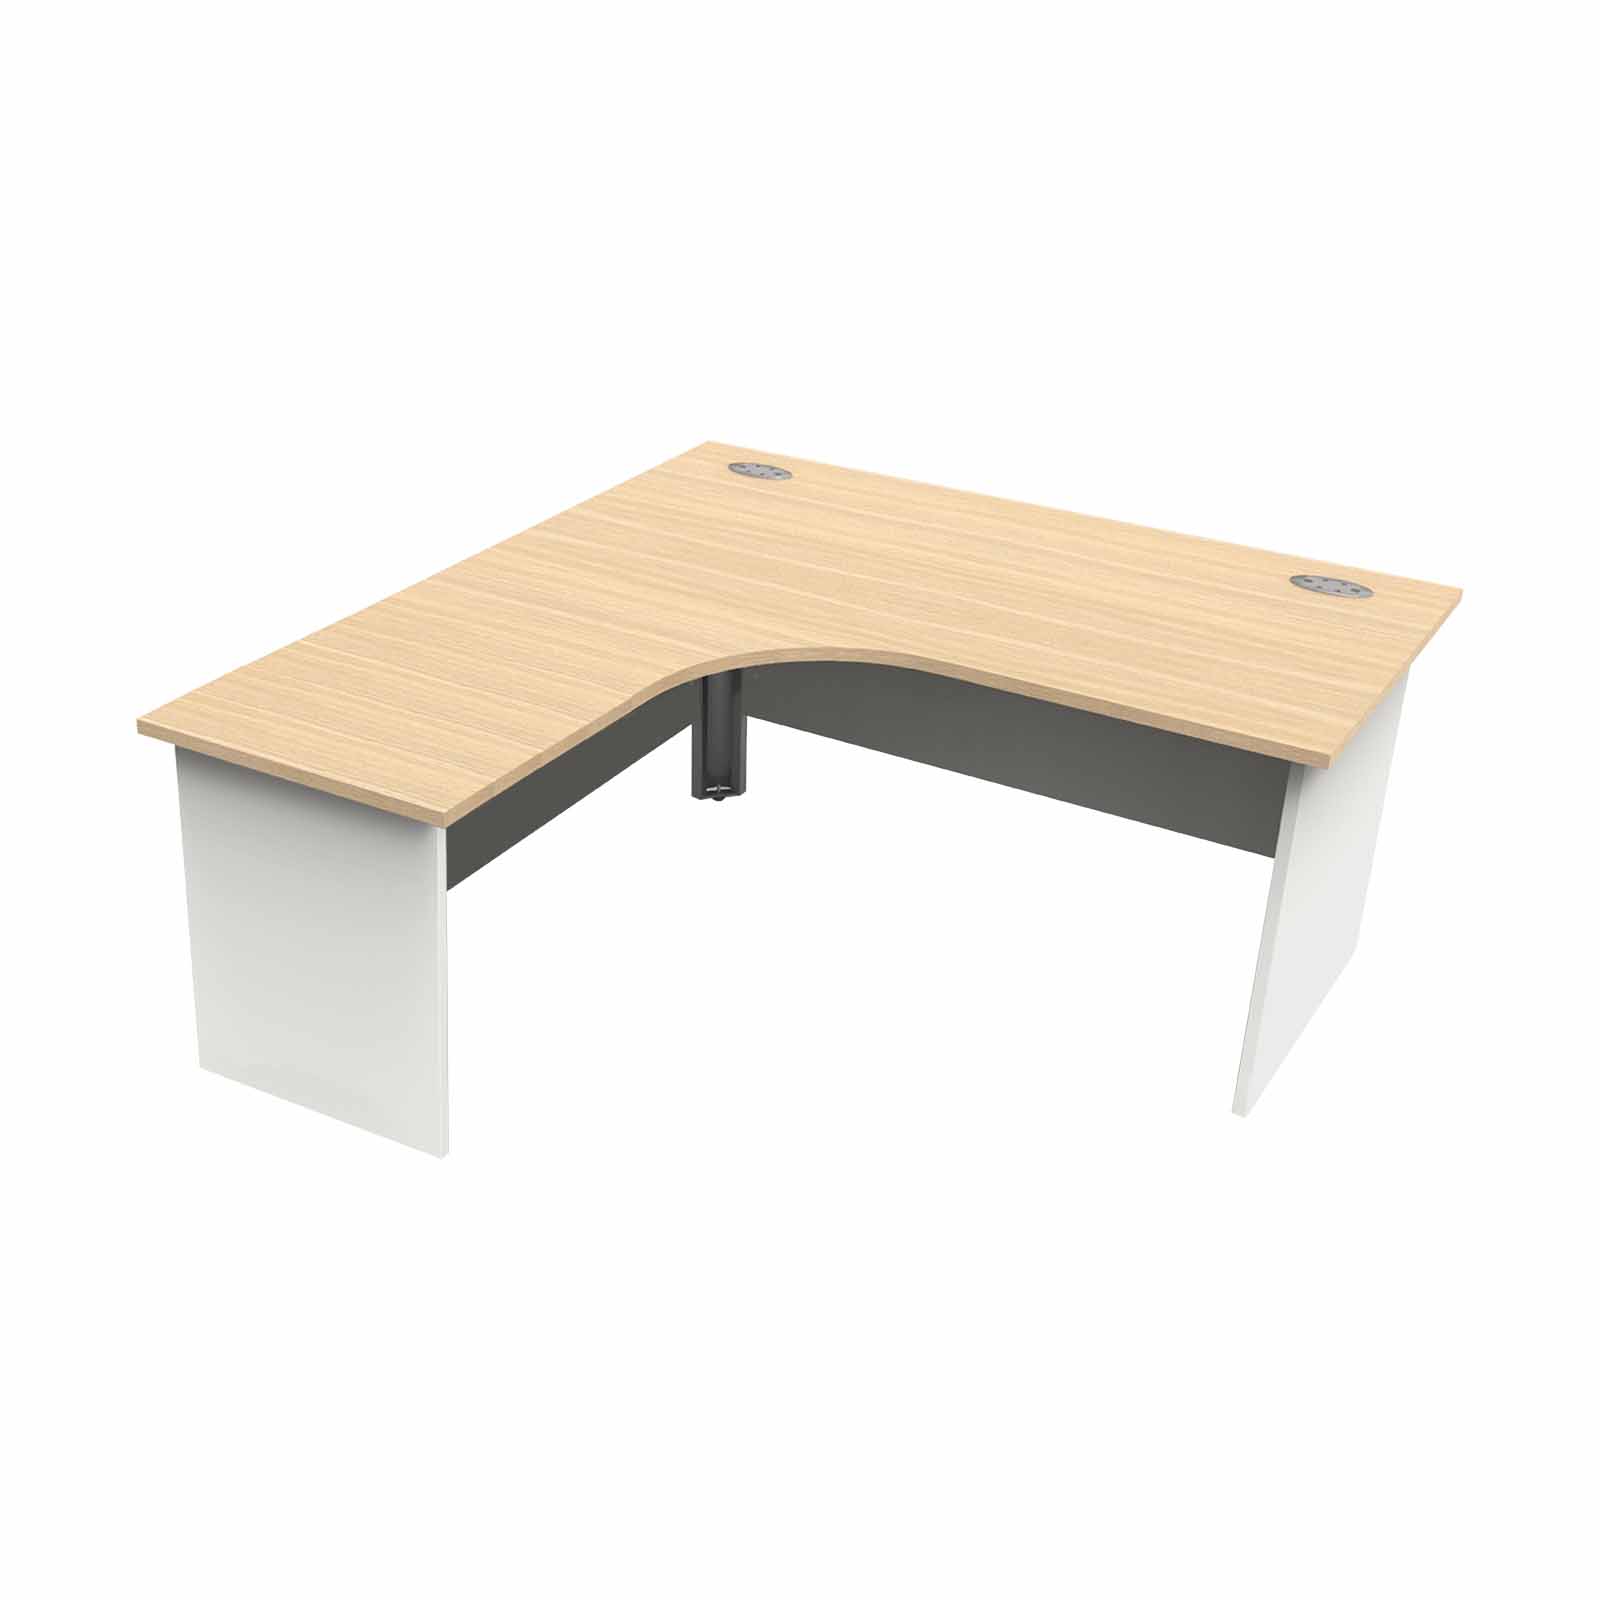 MADE TO ORDER Curved panel end desk